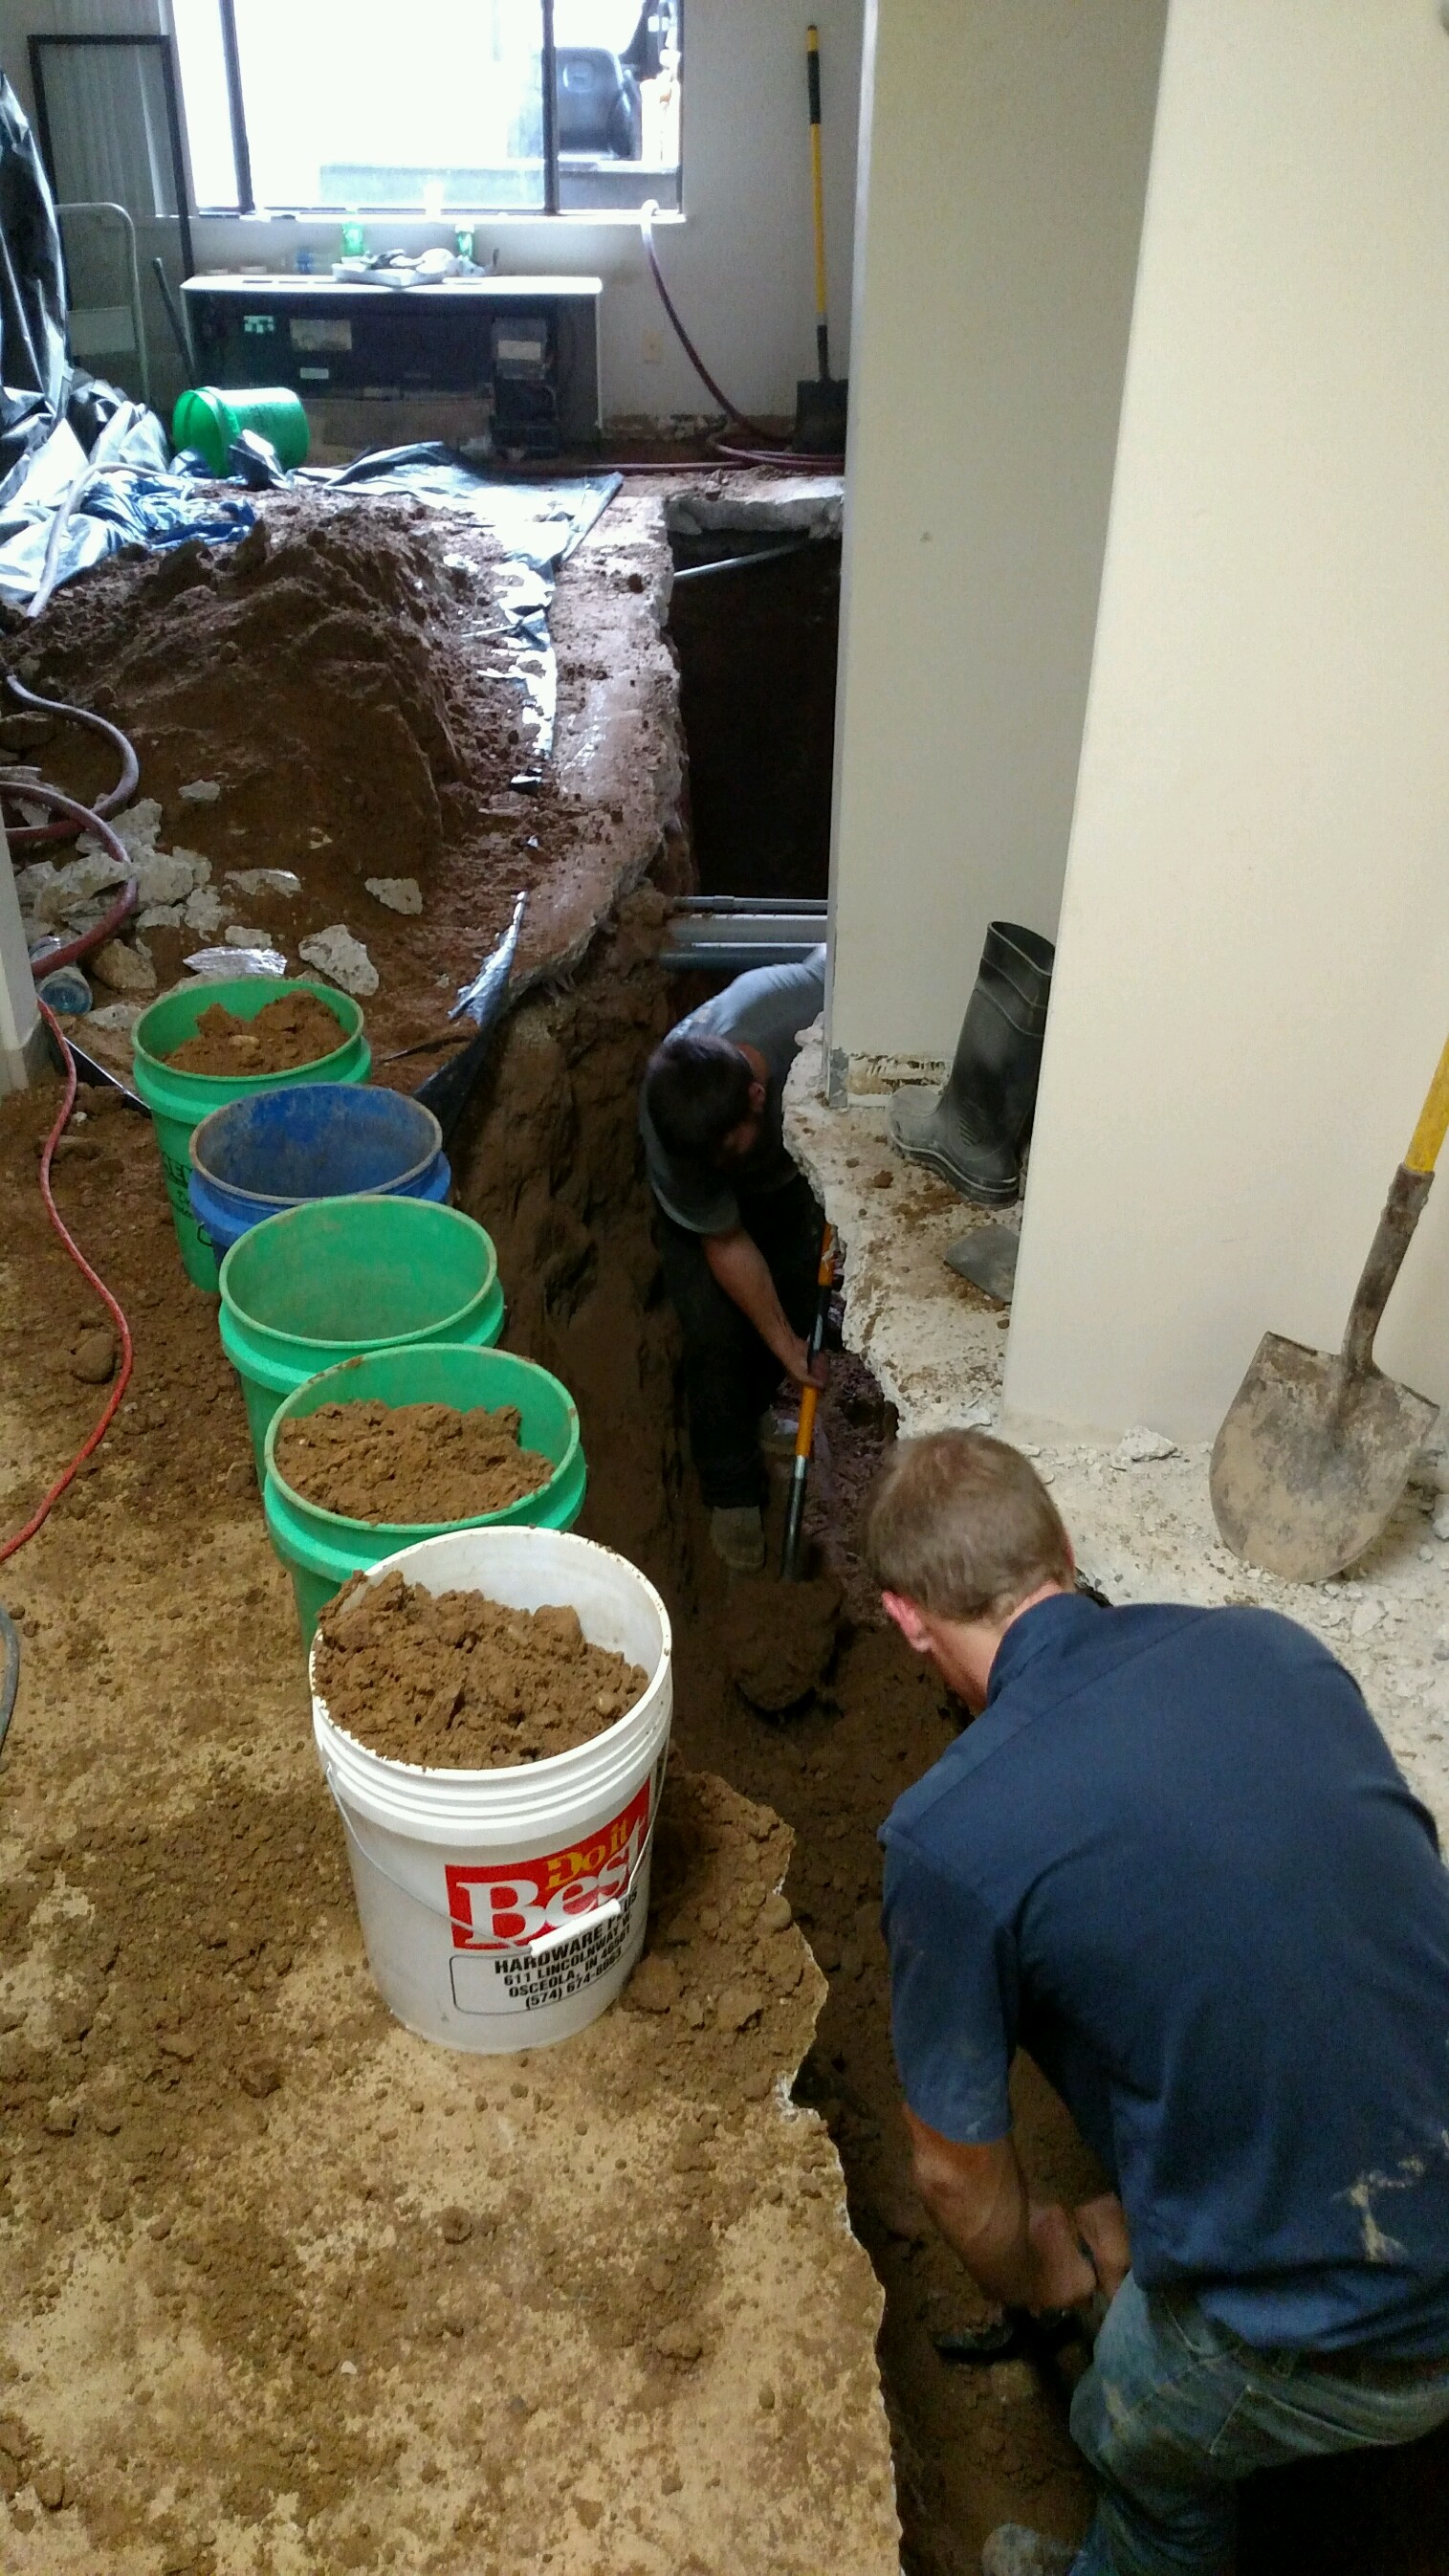 Sewer repair in floor - Jackhammer and excavate down to broken piping to replace.